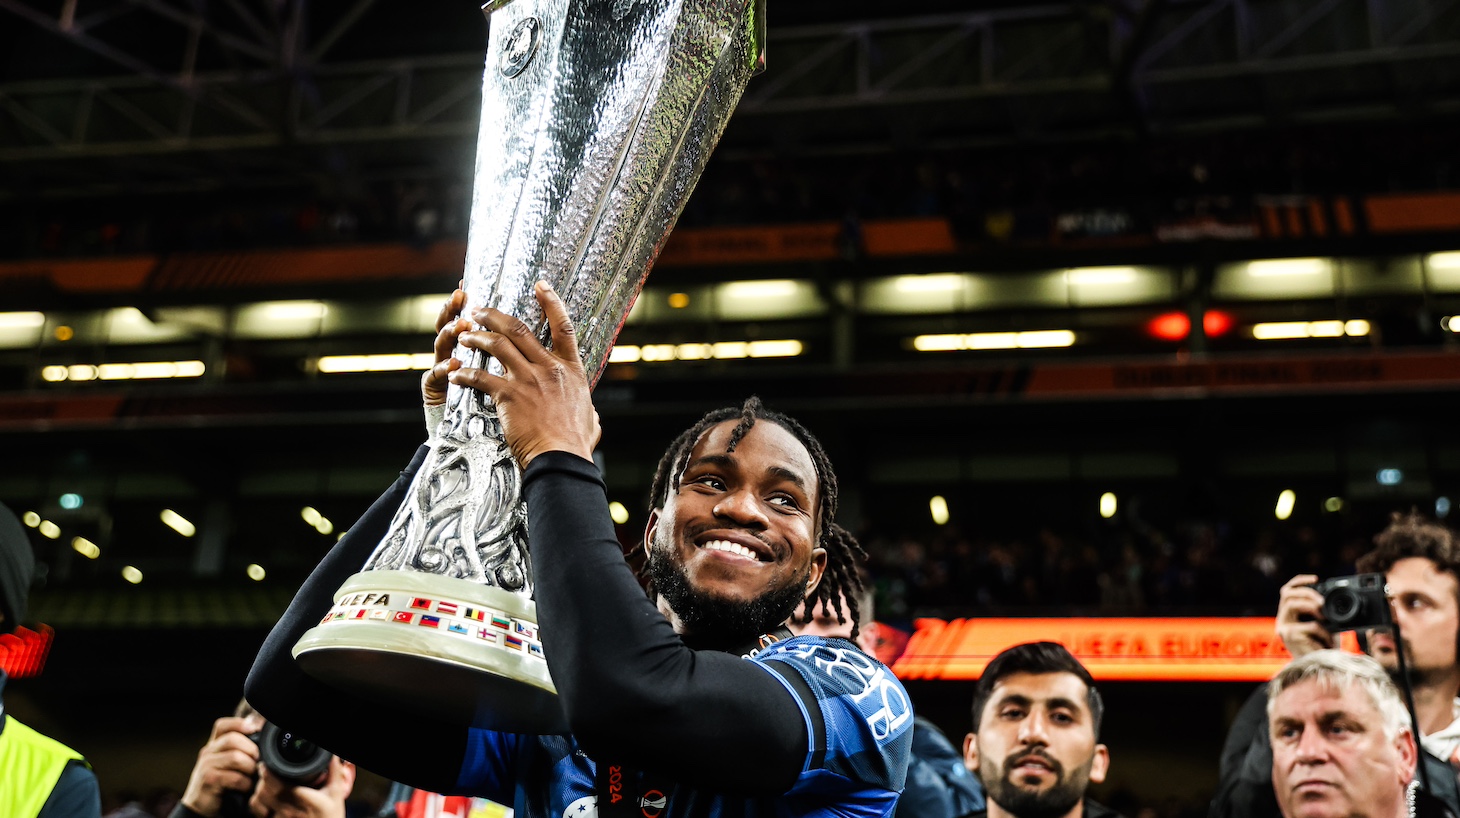 Ademola Lookman of Atalanta BC is celebrating with the UEFA Europa League championship trophy after winning the final match between Bayer Leverkusen and Atalanta BC at Dublin Arena Stadium in Dublin, Ireland.